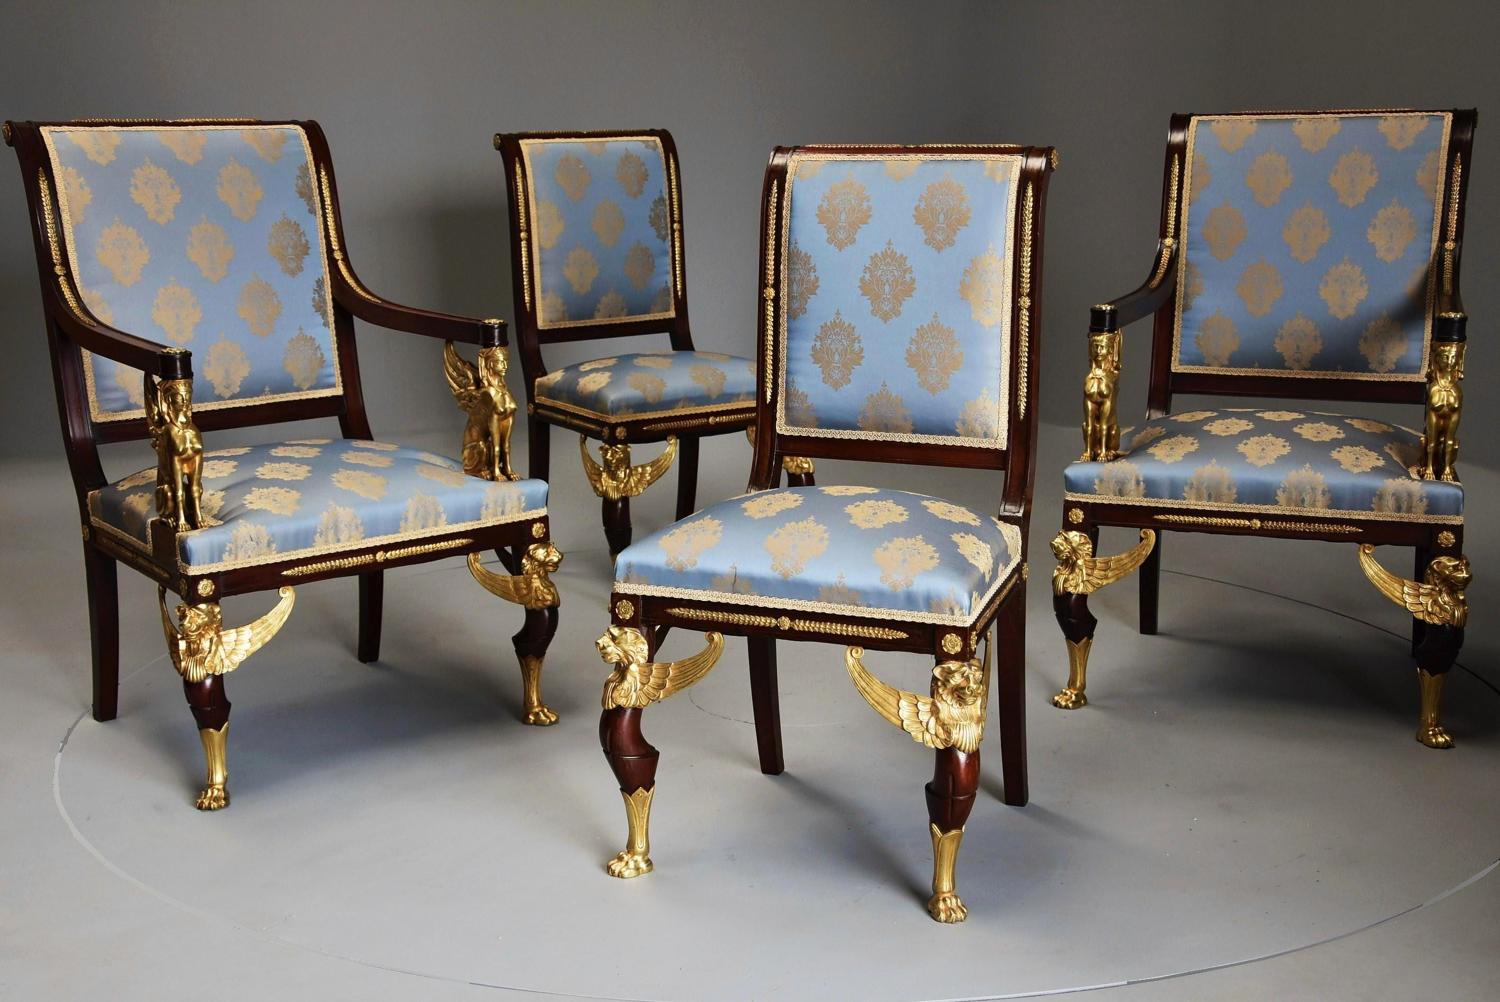 19thc English set of four mahogany chairs in the French Empire style